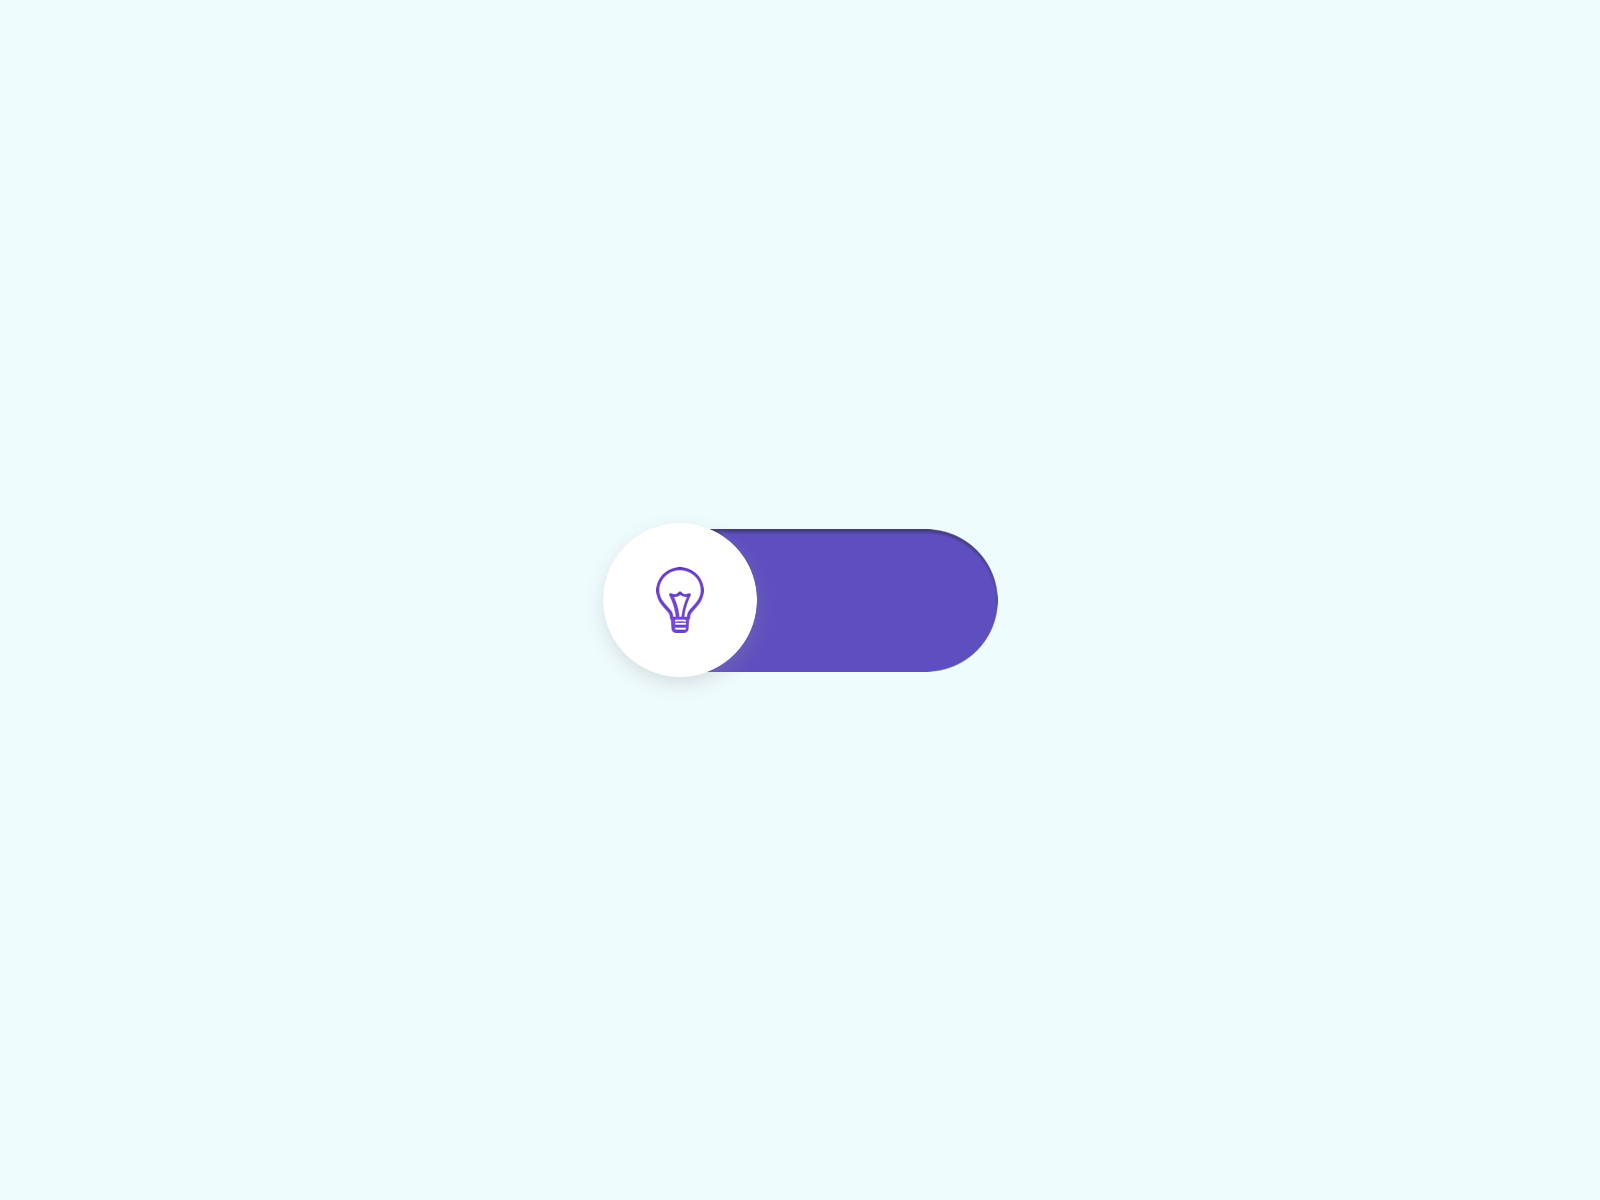 Daily UI 015 | On/Off Switch 015 animation button dailyui dailyui015 dailyuichallenge dailyuiux lamp onoff onoffswitch principle shadow switch switchbutton toggle ui ui015 uidesign uiux userinterface